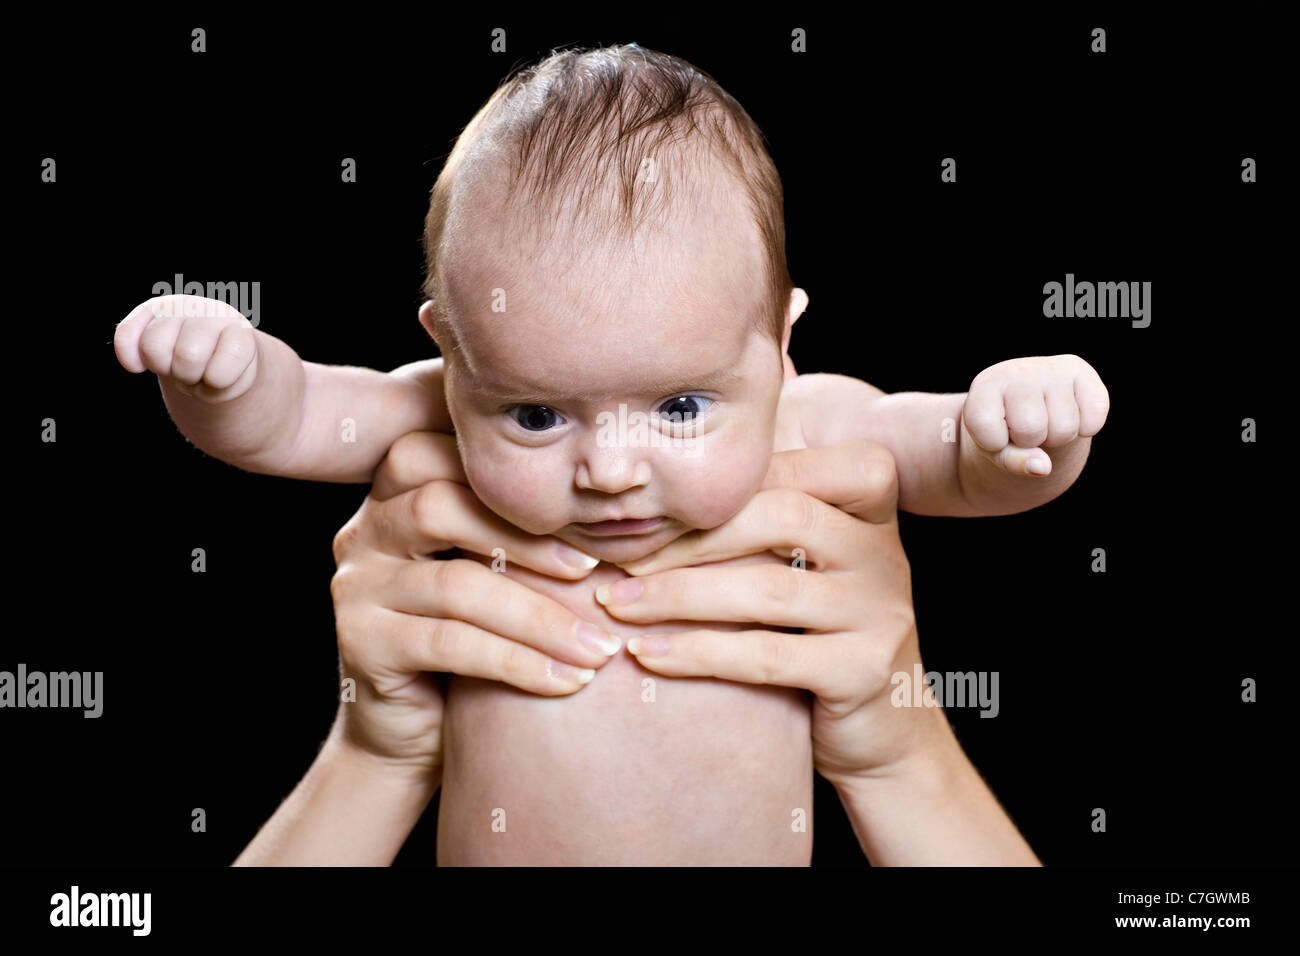 A baby held aloft staring down Stock Photo